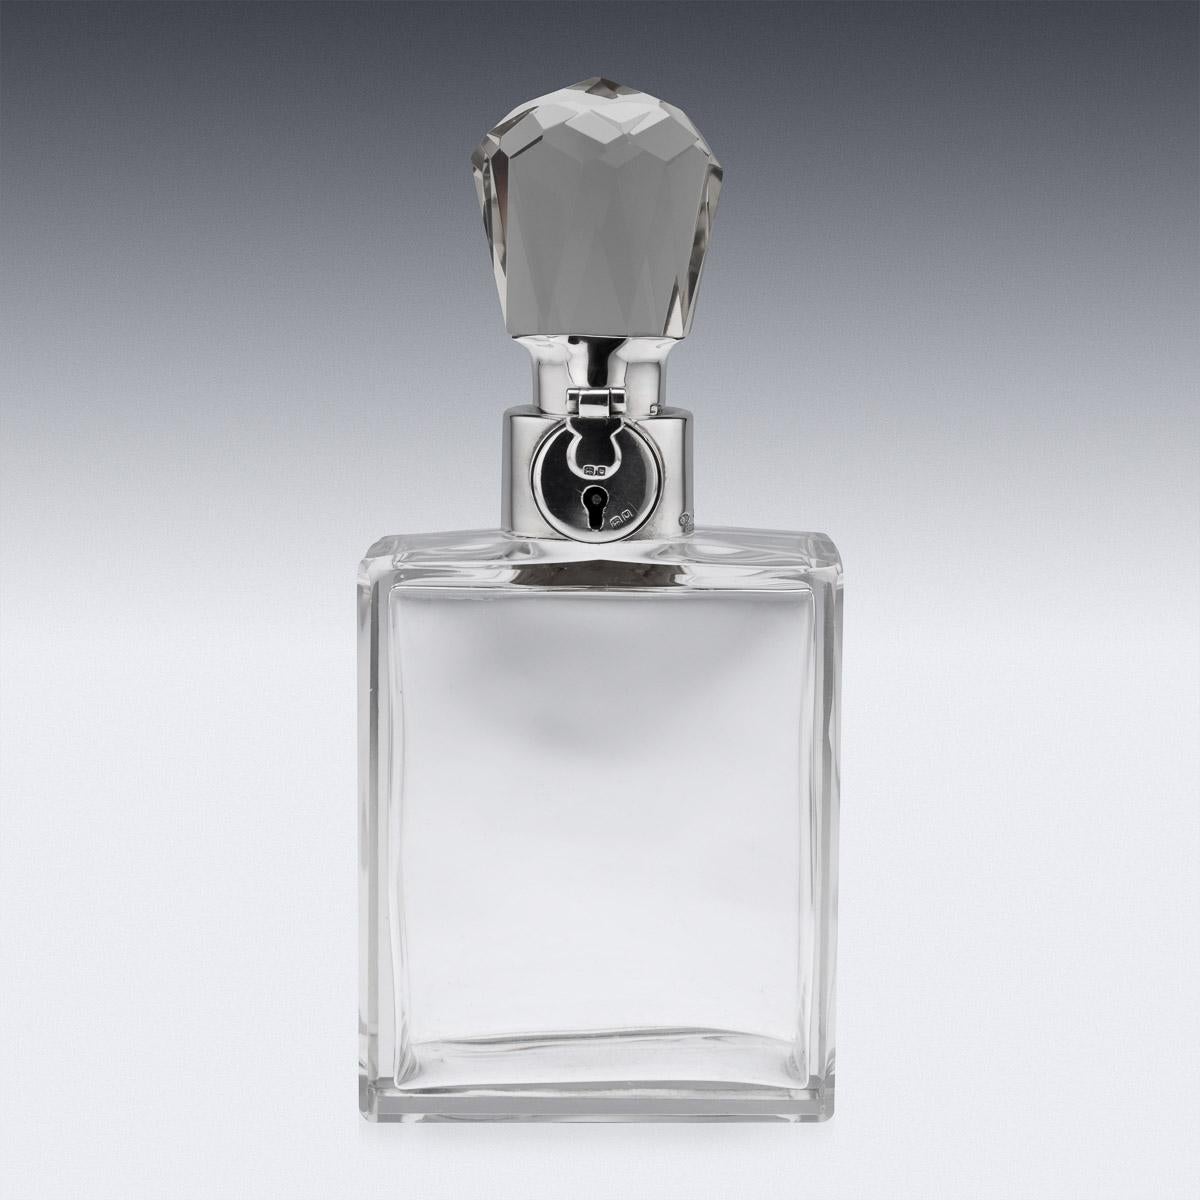 20th century English Art Deco silver & glass spirit decanter. Of mid size with glass body and mounted with elegant octagonal cut stopper. Applied with a silver collar and lock mechanism with key. Hallmarked English silver (925 standard), London,